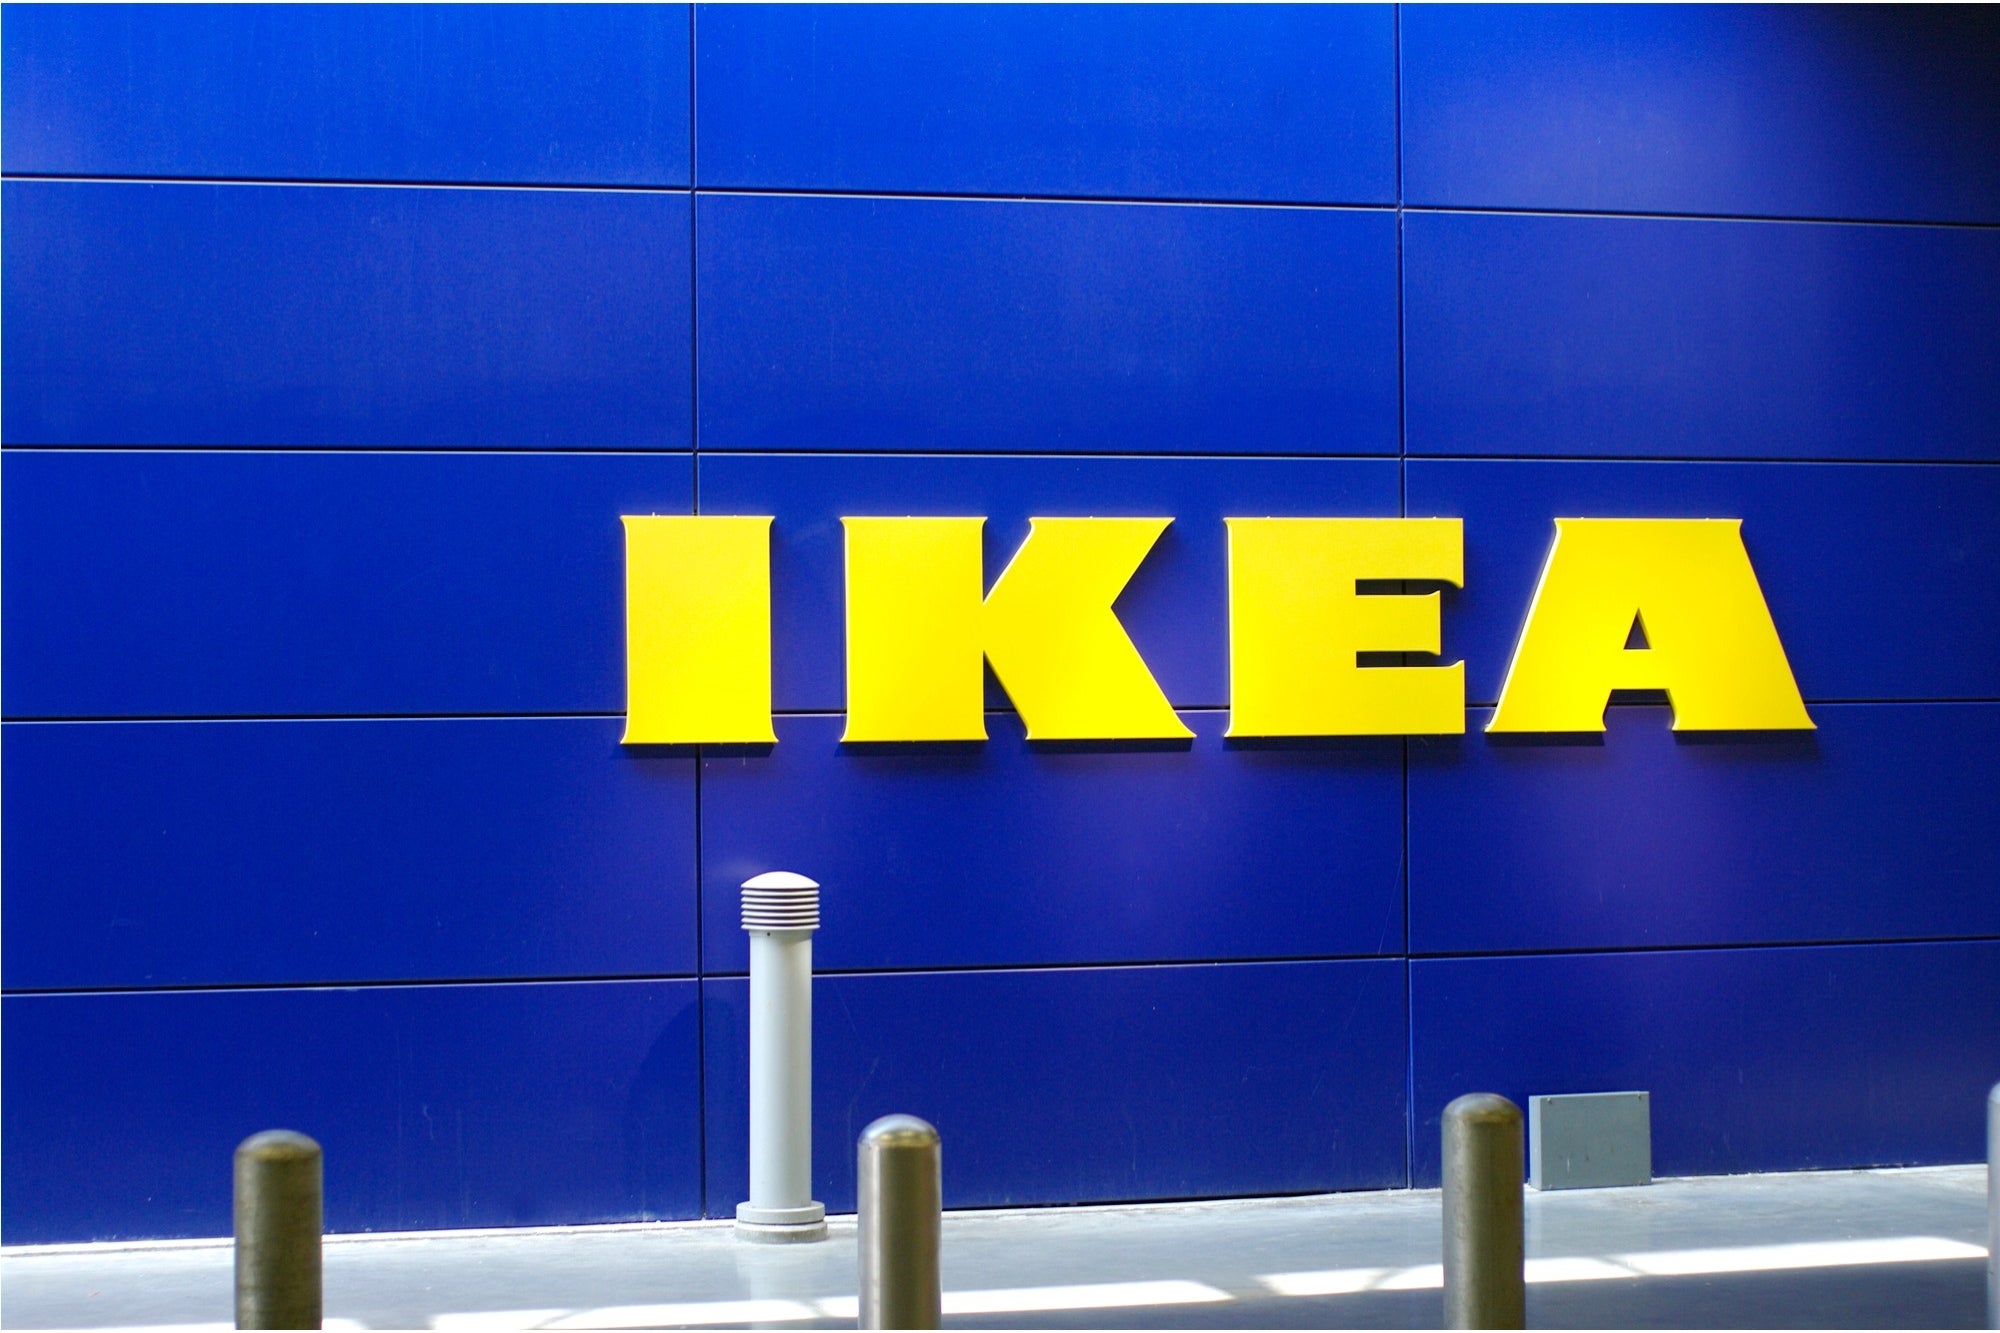 IKEA will open a store in Puebla, this would be its second branch in Mexico